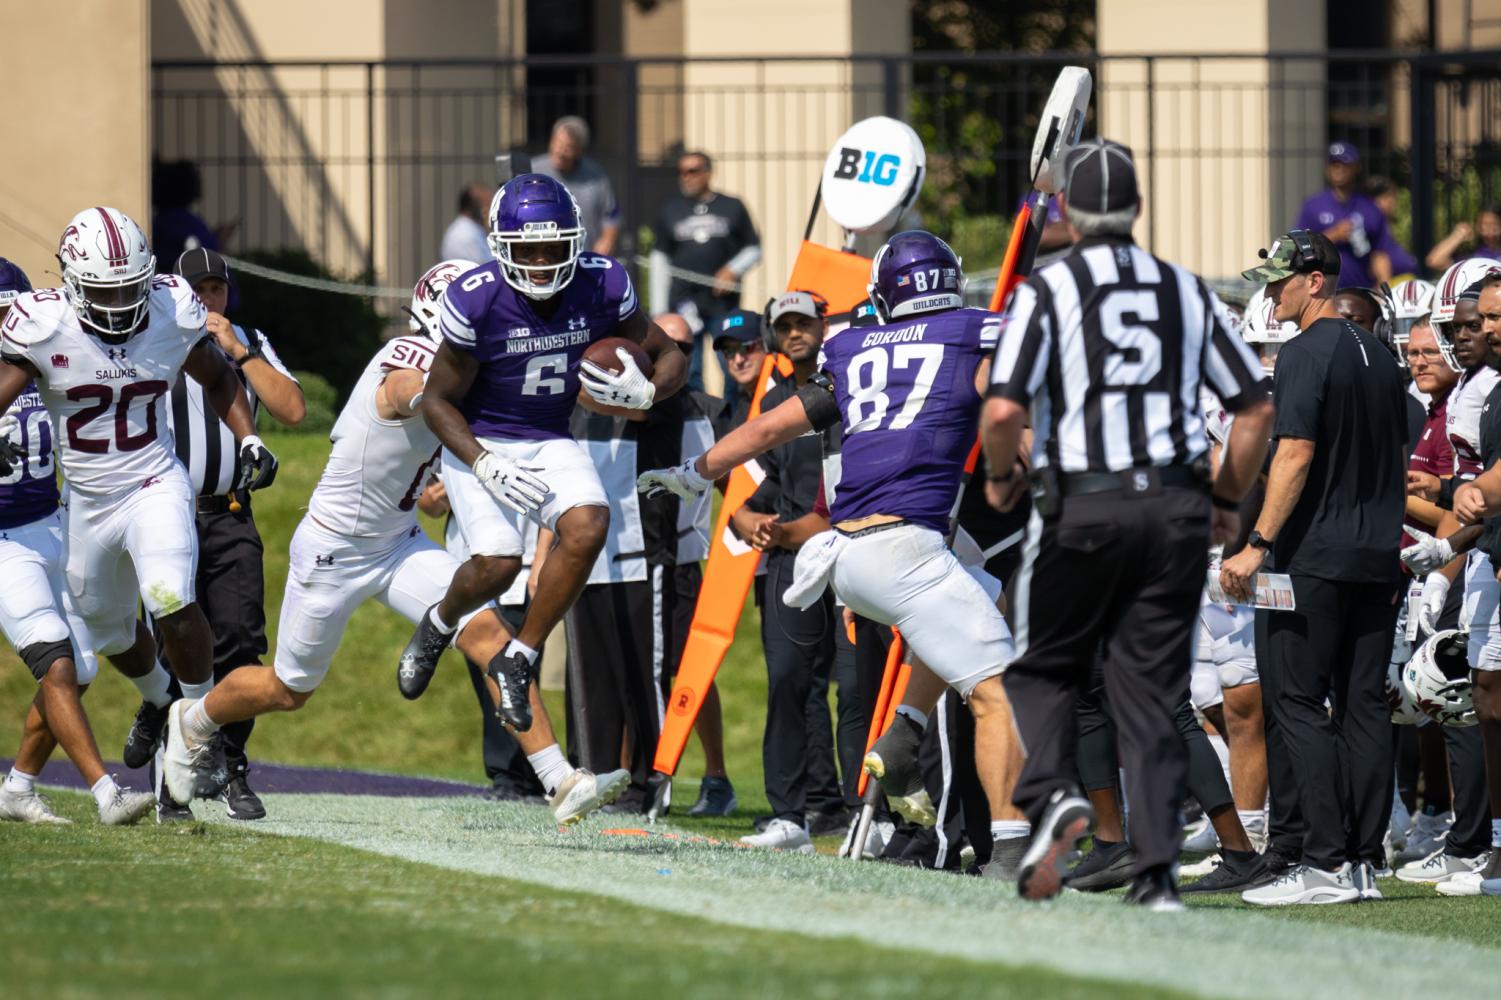 A football player in a purple jersey jumps onto the sidelines to try to avoid a tackle by a player in a white jersey.